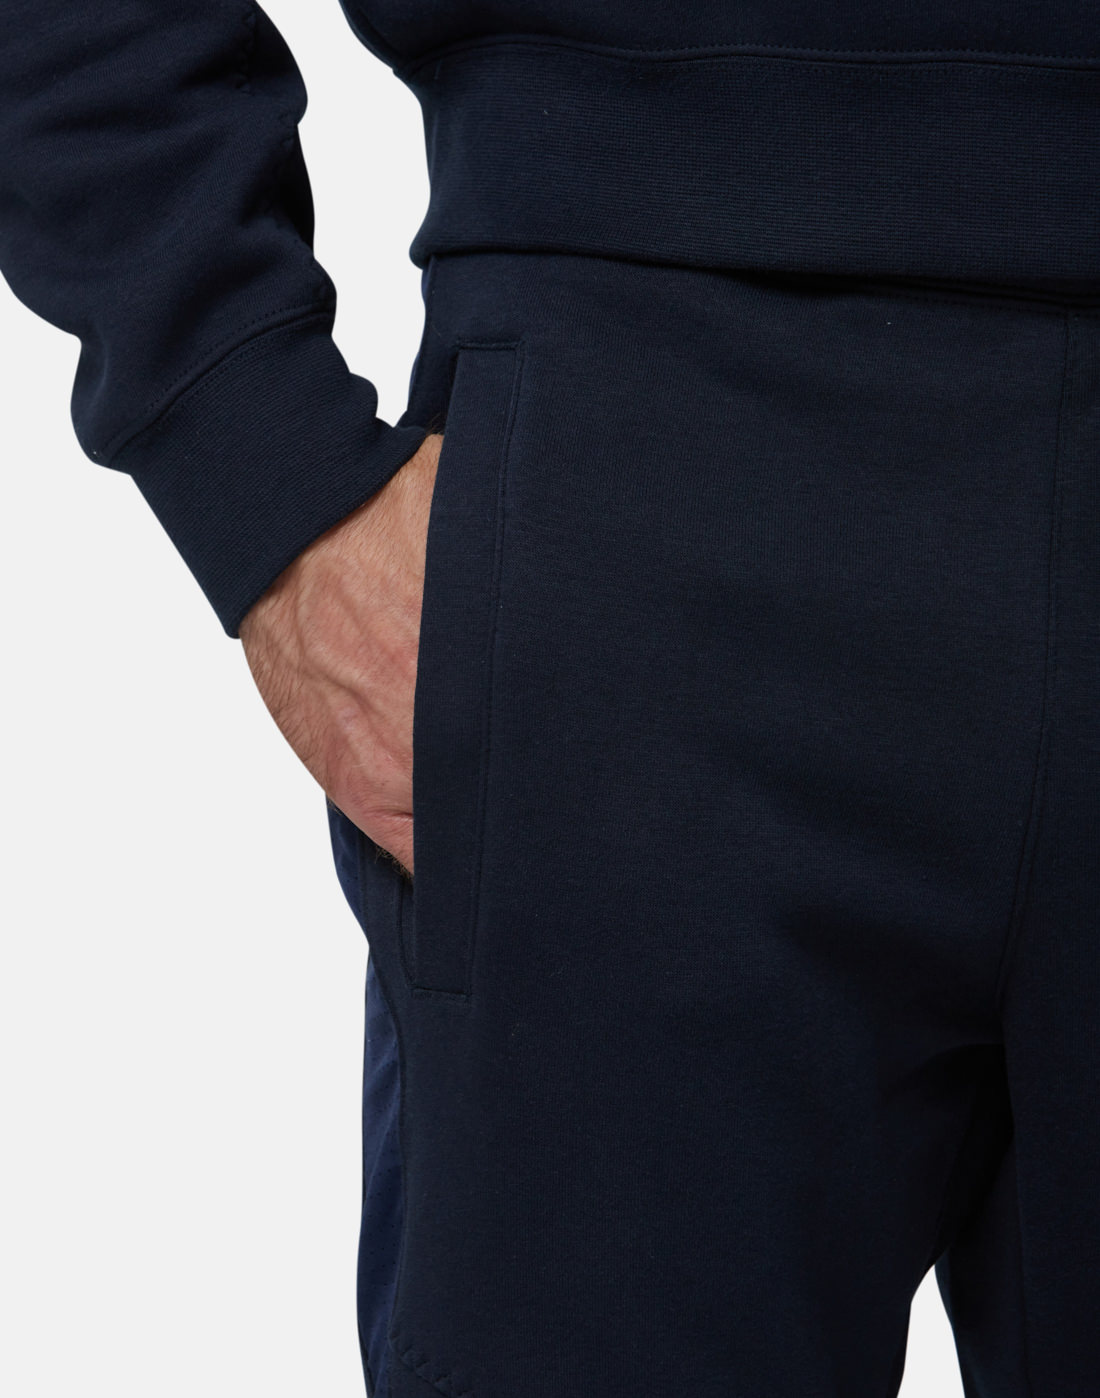 Nike Mens Sports Pack Fleece Cargo Pants - Navy | Life Style Sports IE